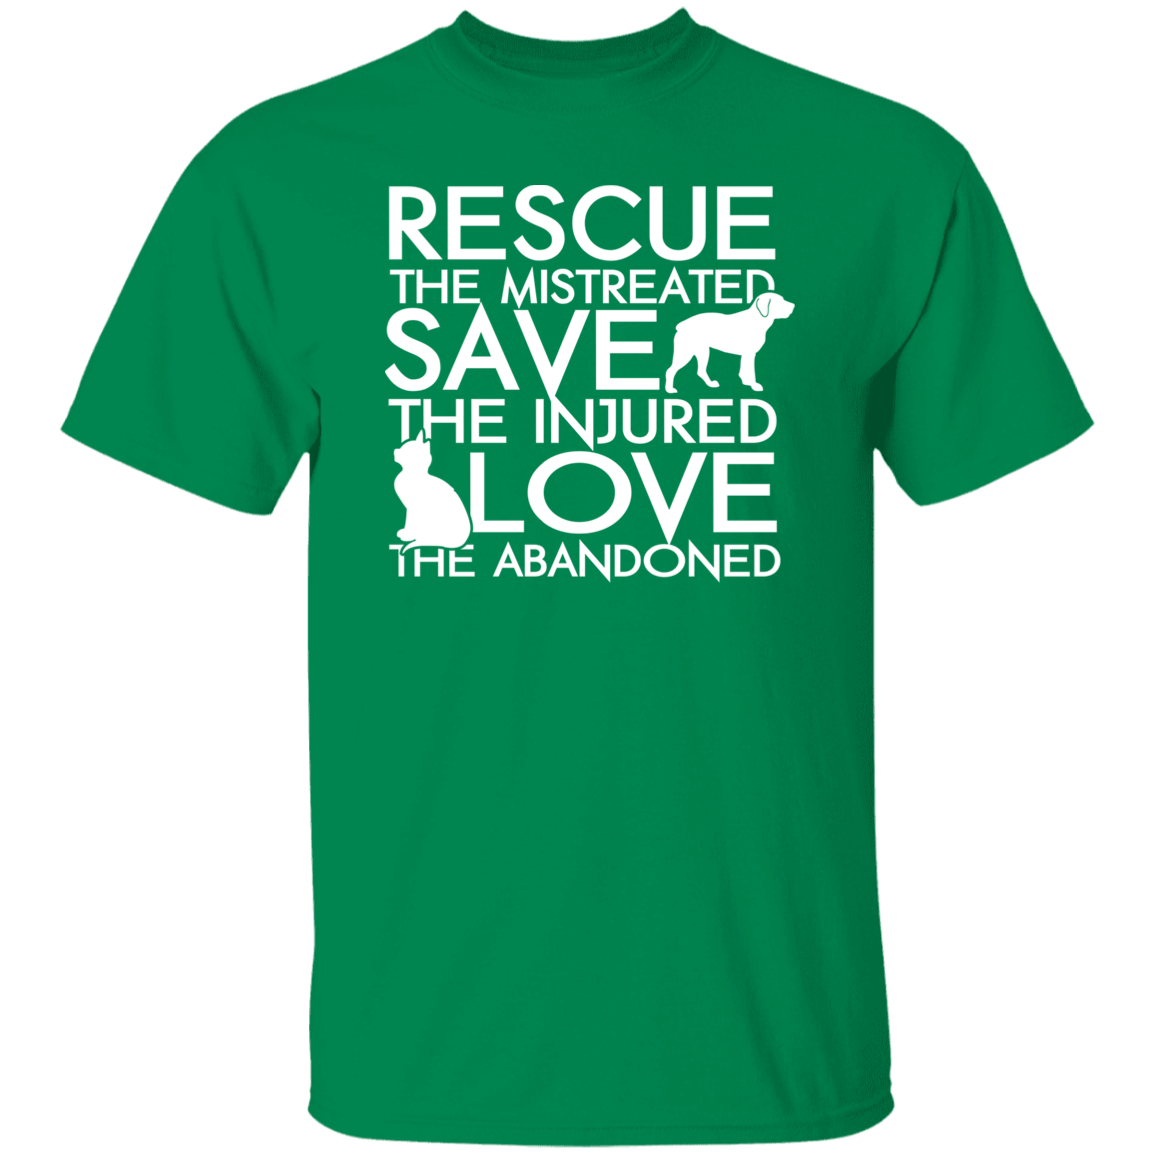 Rescue Save Love - T-Shirt.